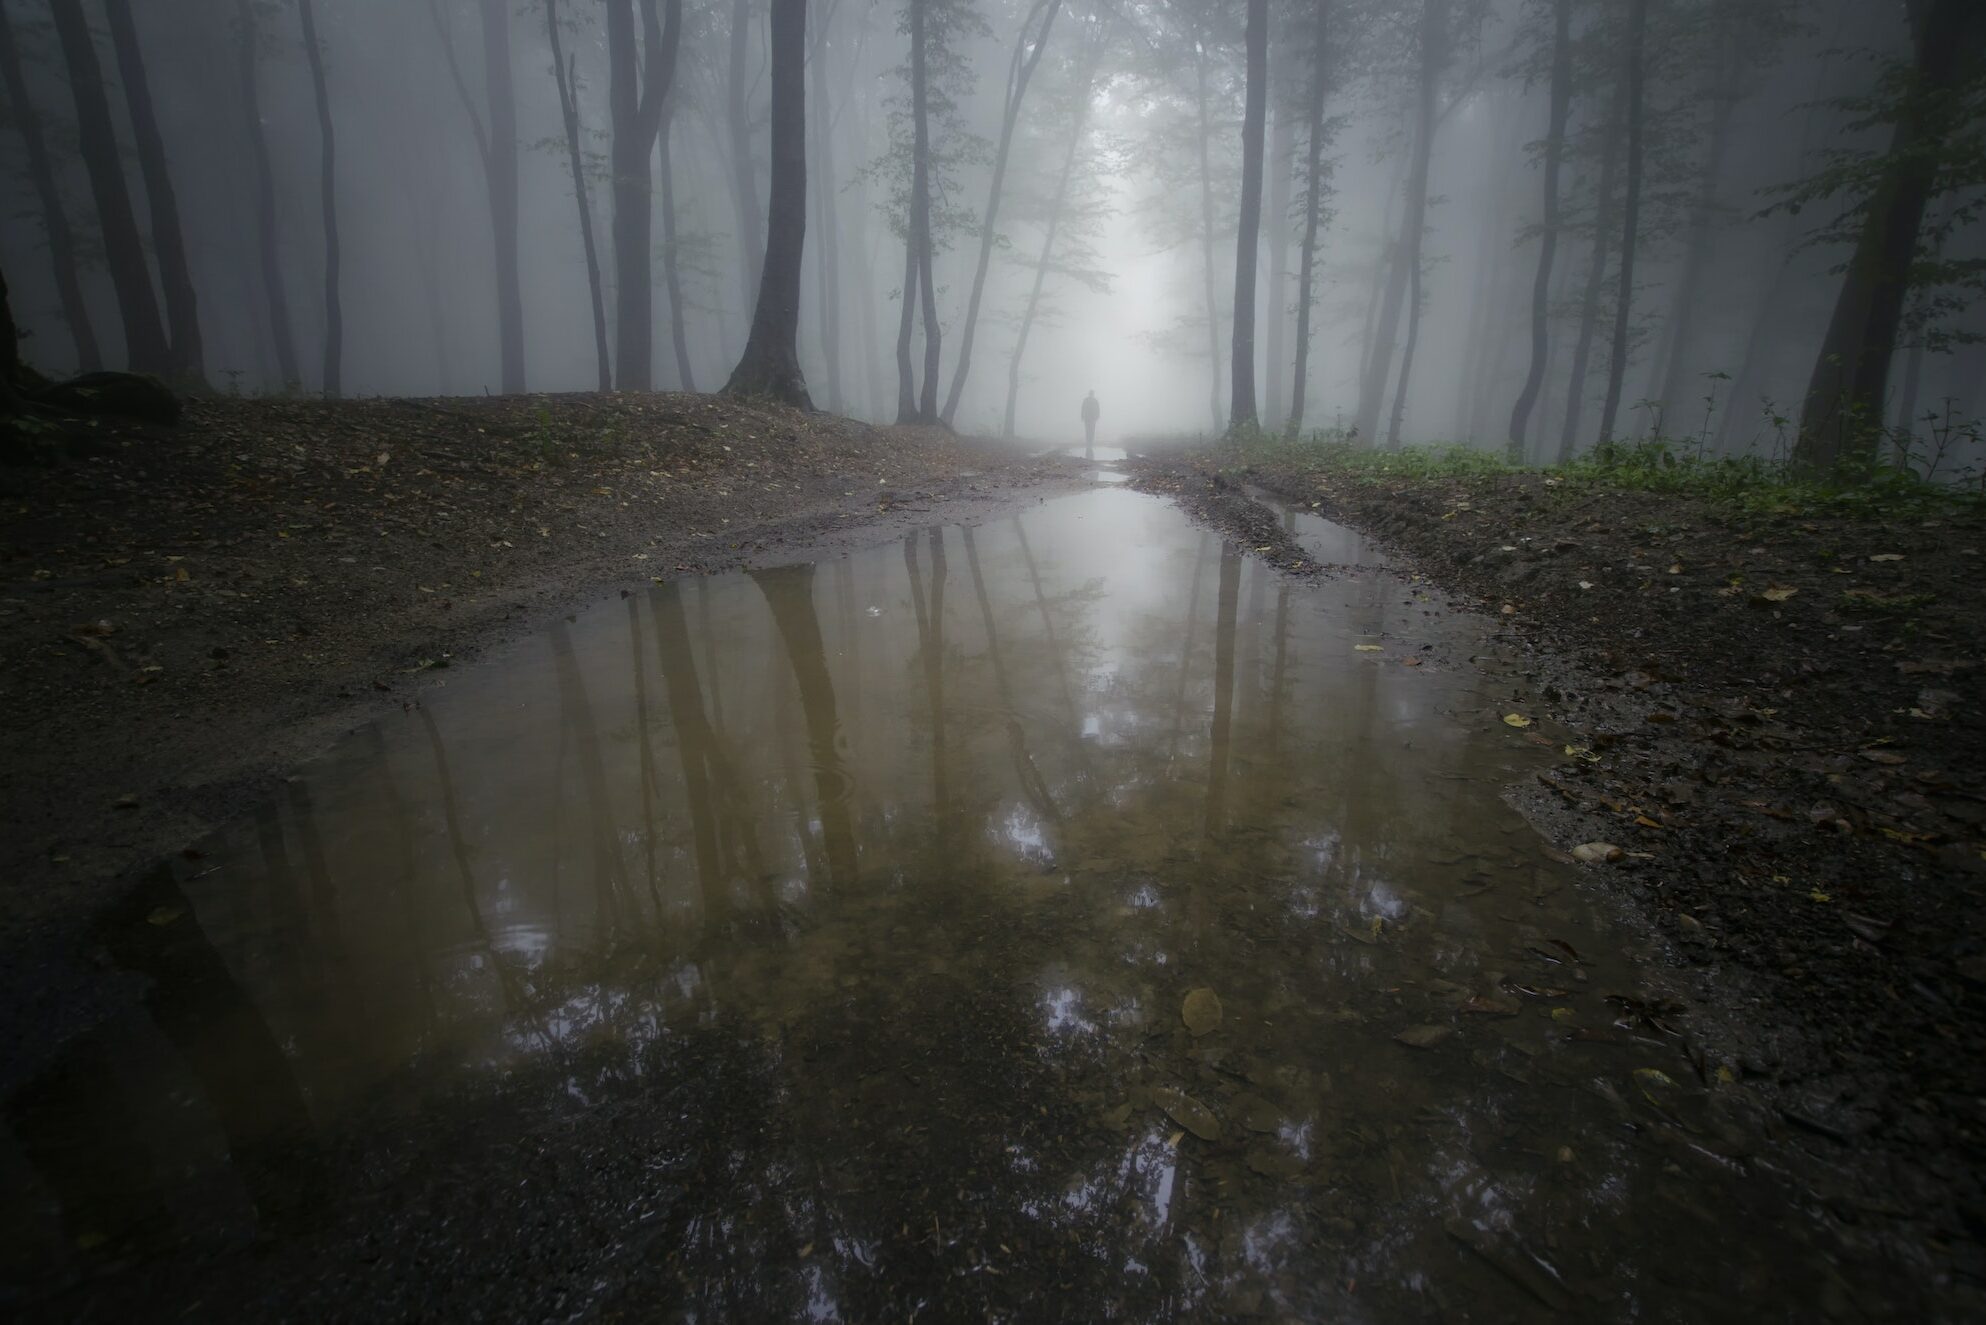 Lake in surreal forest with fog